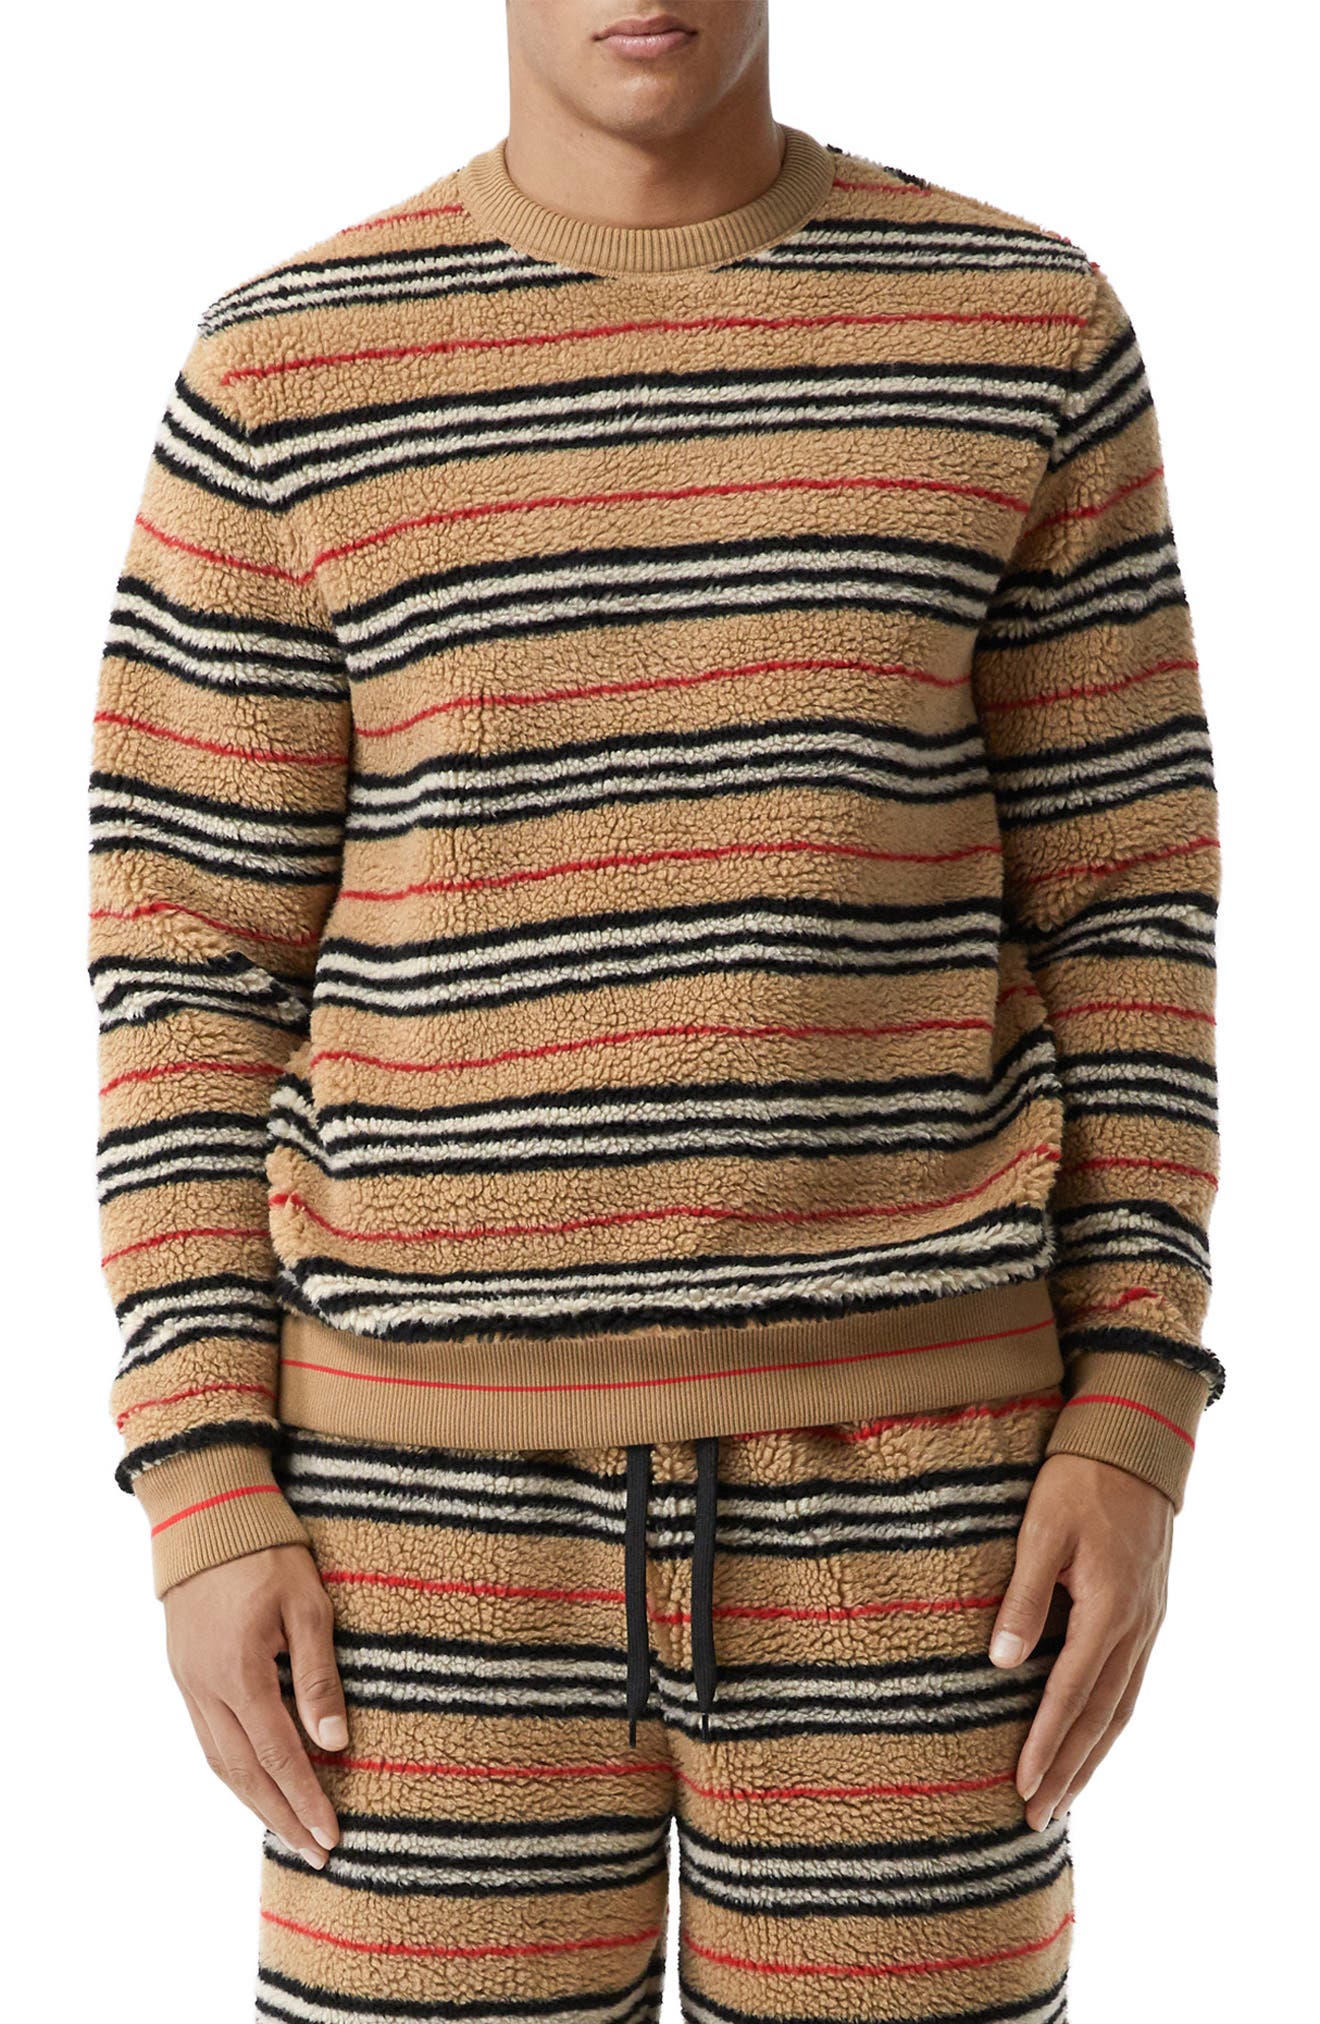 men's sweaters with cool designs